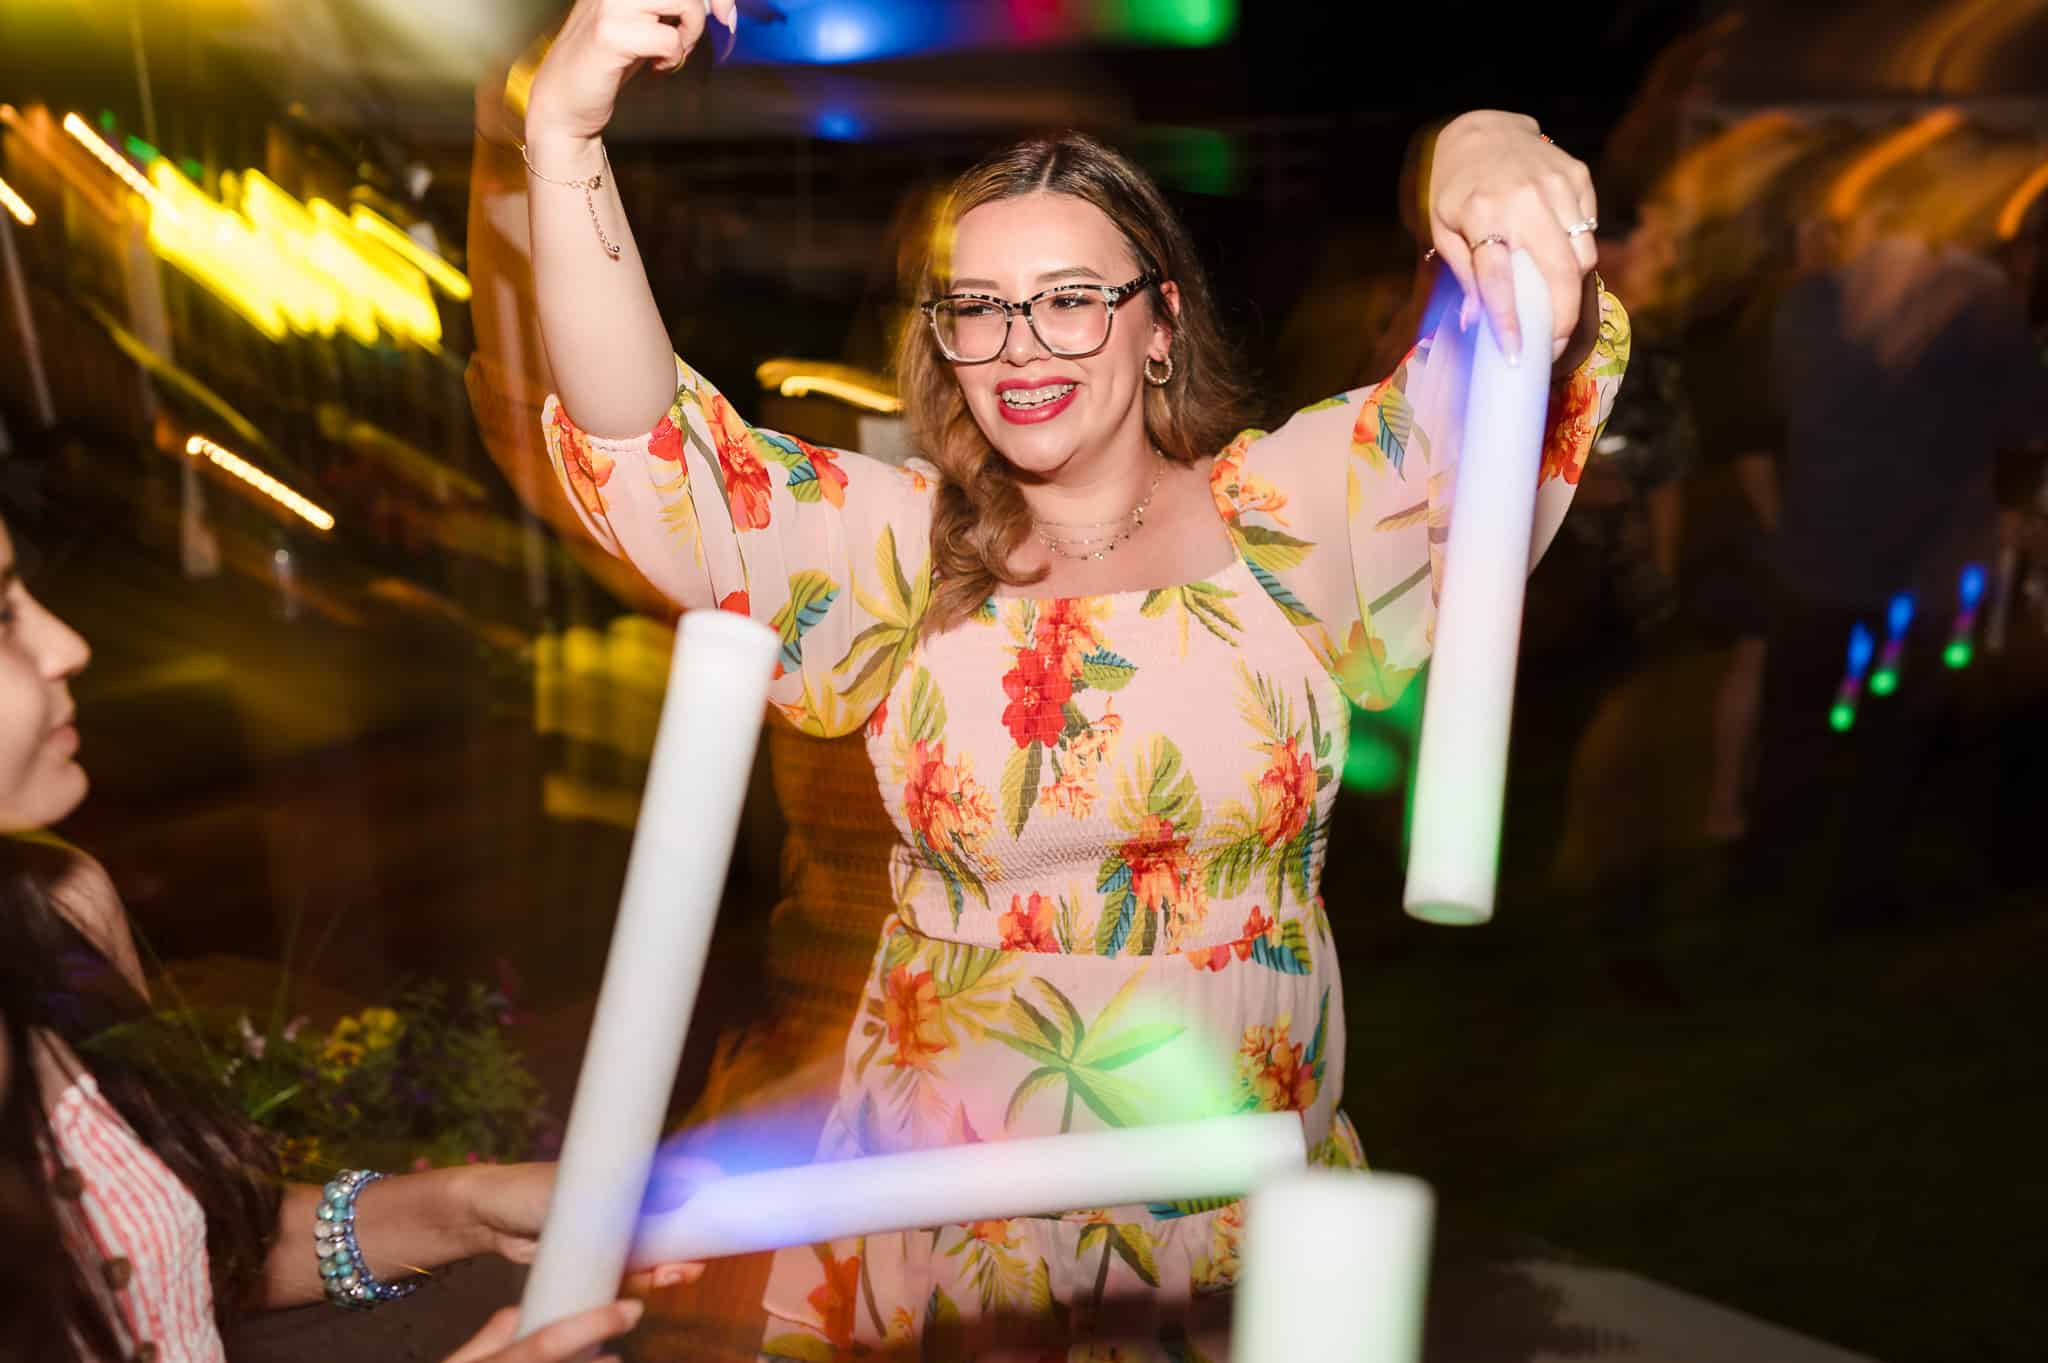 A guest holding glow sticks dances at the wedding reception.